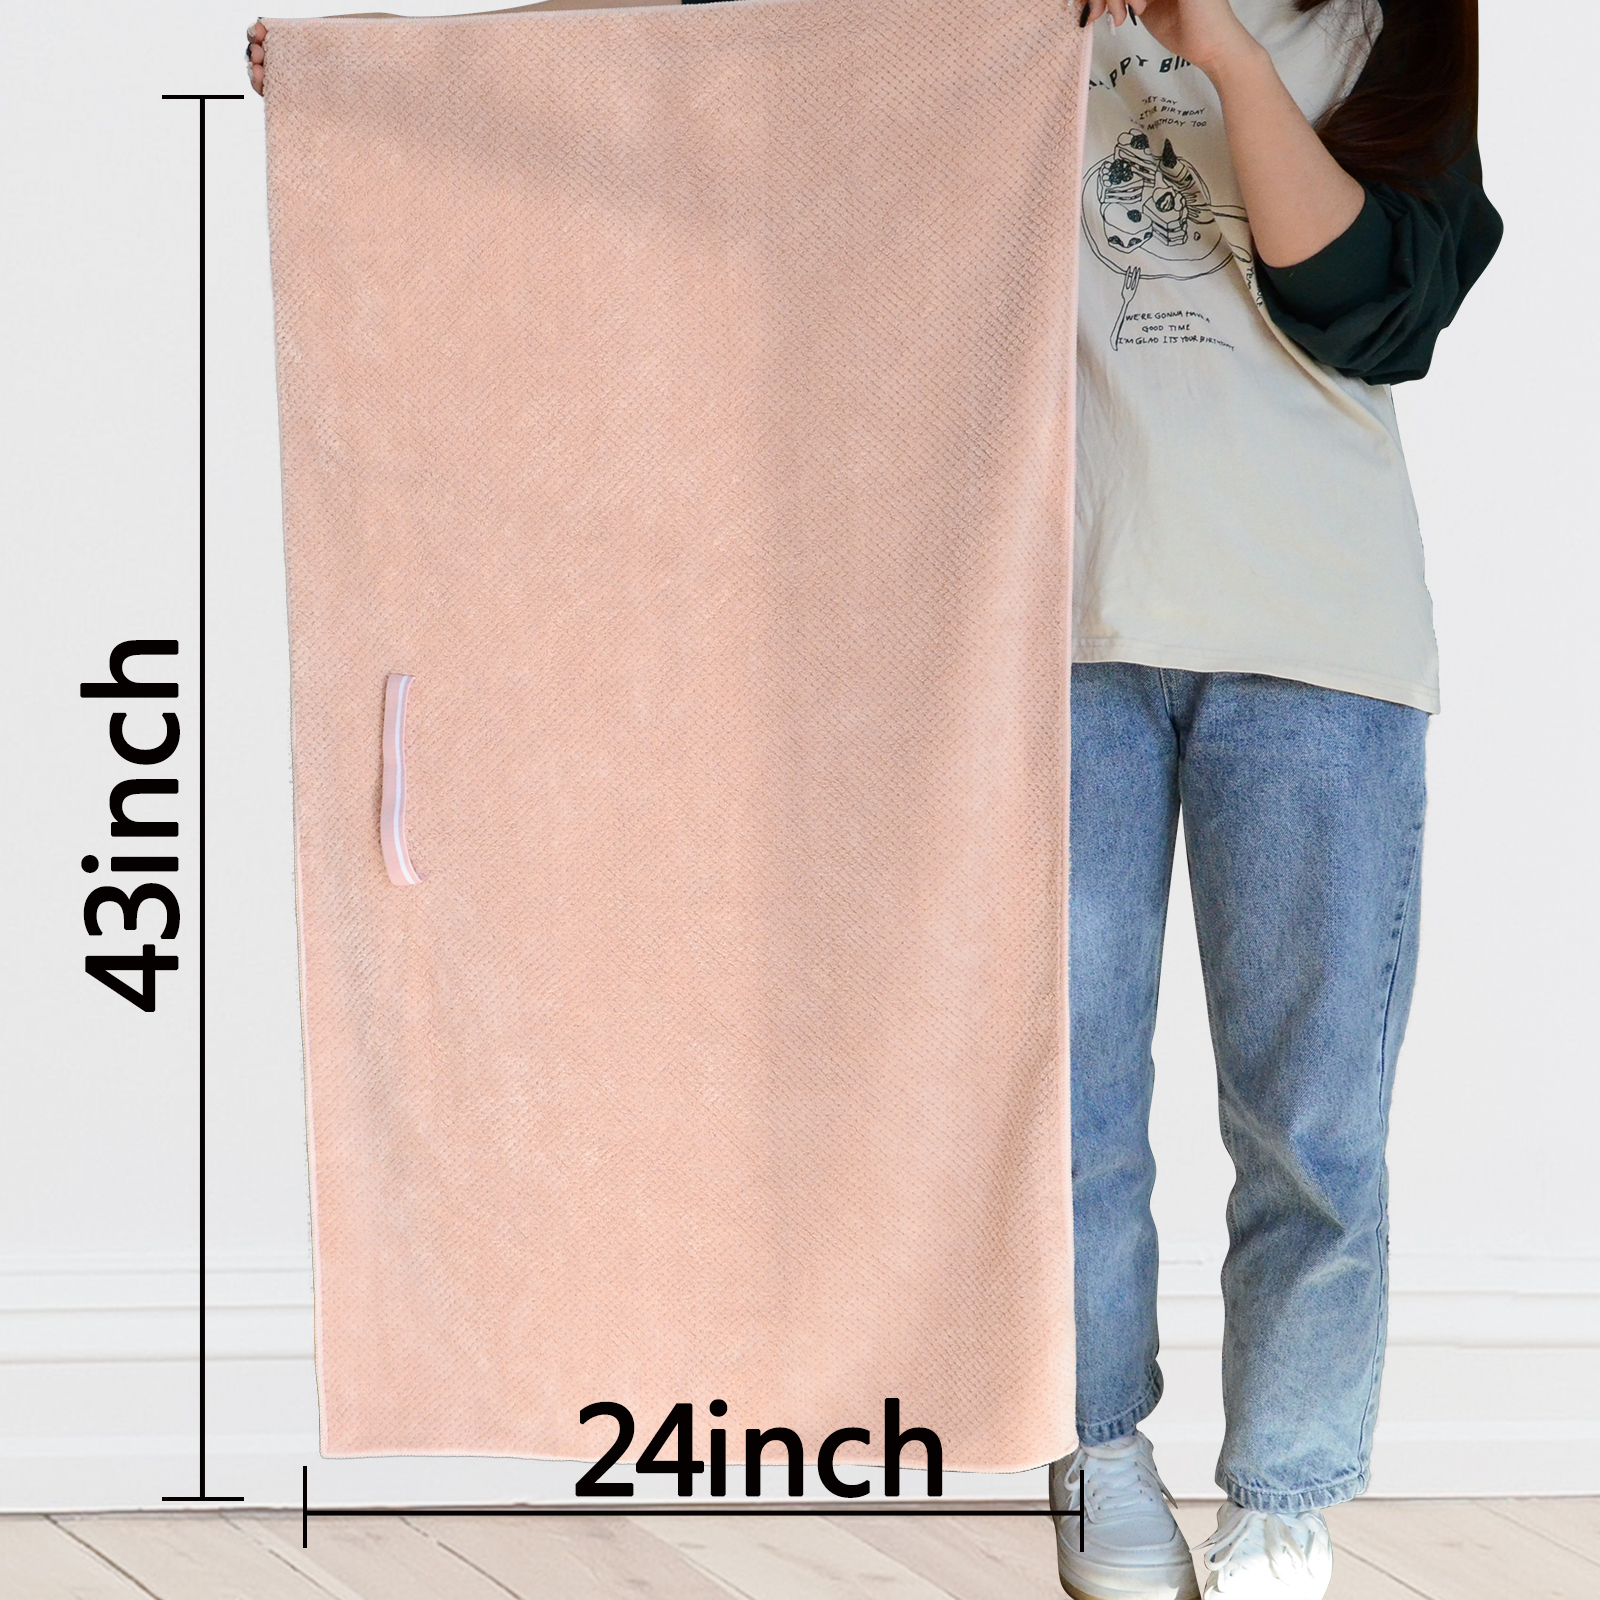 Oversized Microfiber Women's Hair Towel, 109.22cm X 60.96cm Anti-frizz hair drying towel with elastic band, wrapped towel absorbent quick-drying long hair bandana